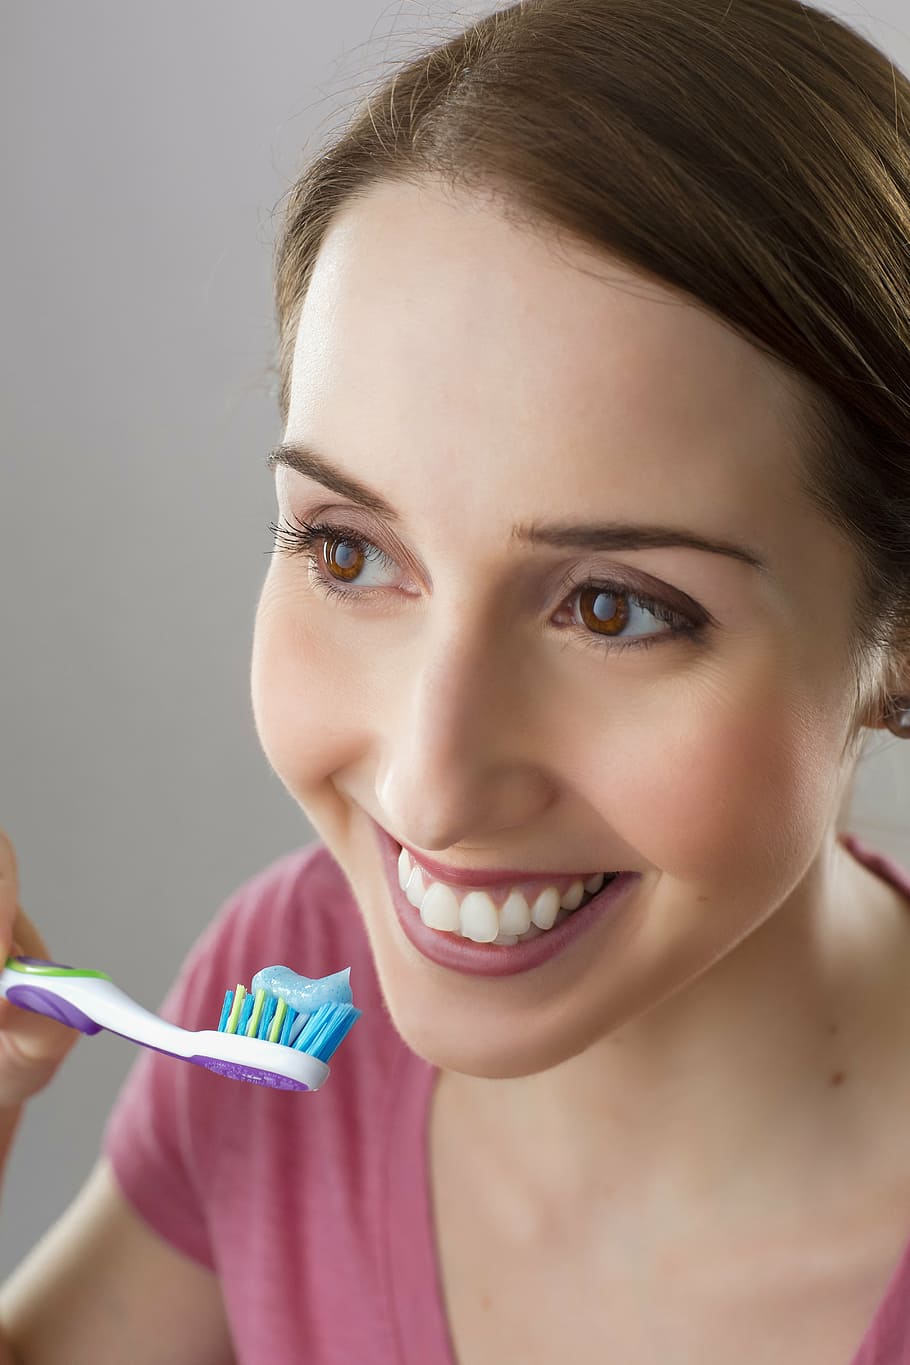 woman holding toothbrush while smiling, dentist, smile, hygiene